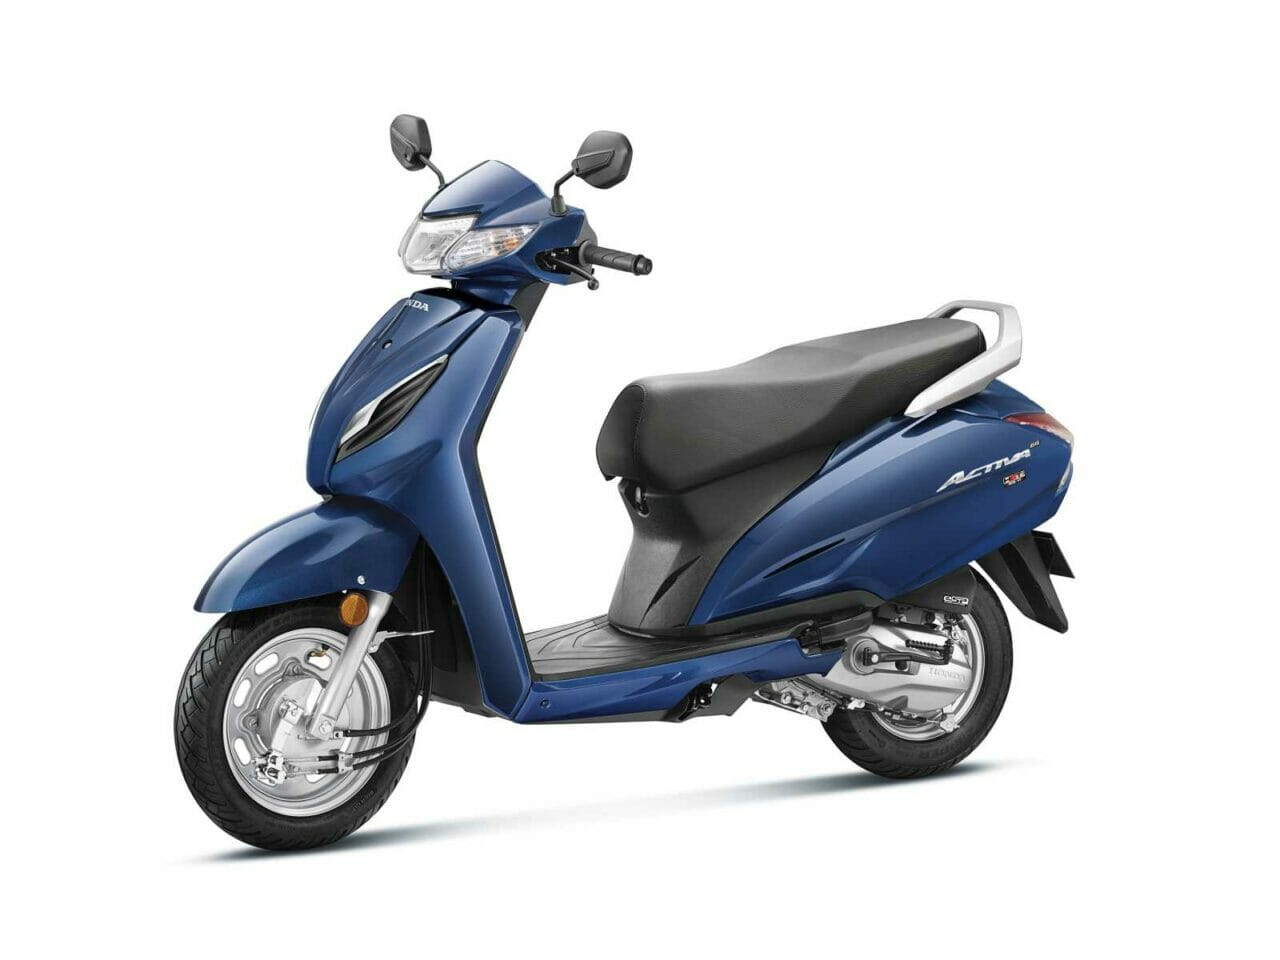 Honda Recalls Activa 6g Activa 125 And Dio Bs6 Is Your Scooter Affected Motoroids